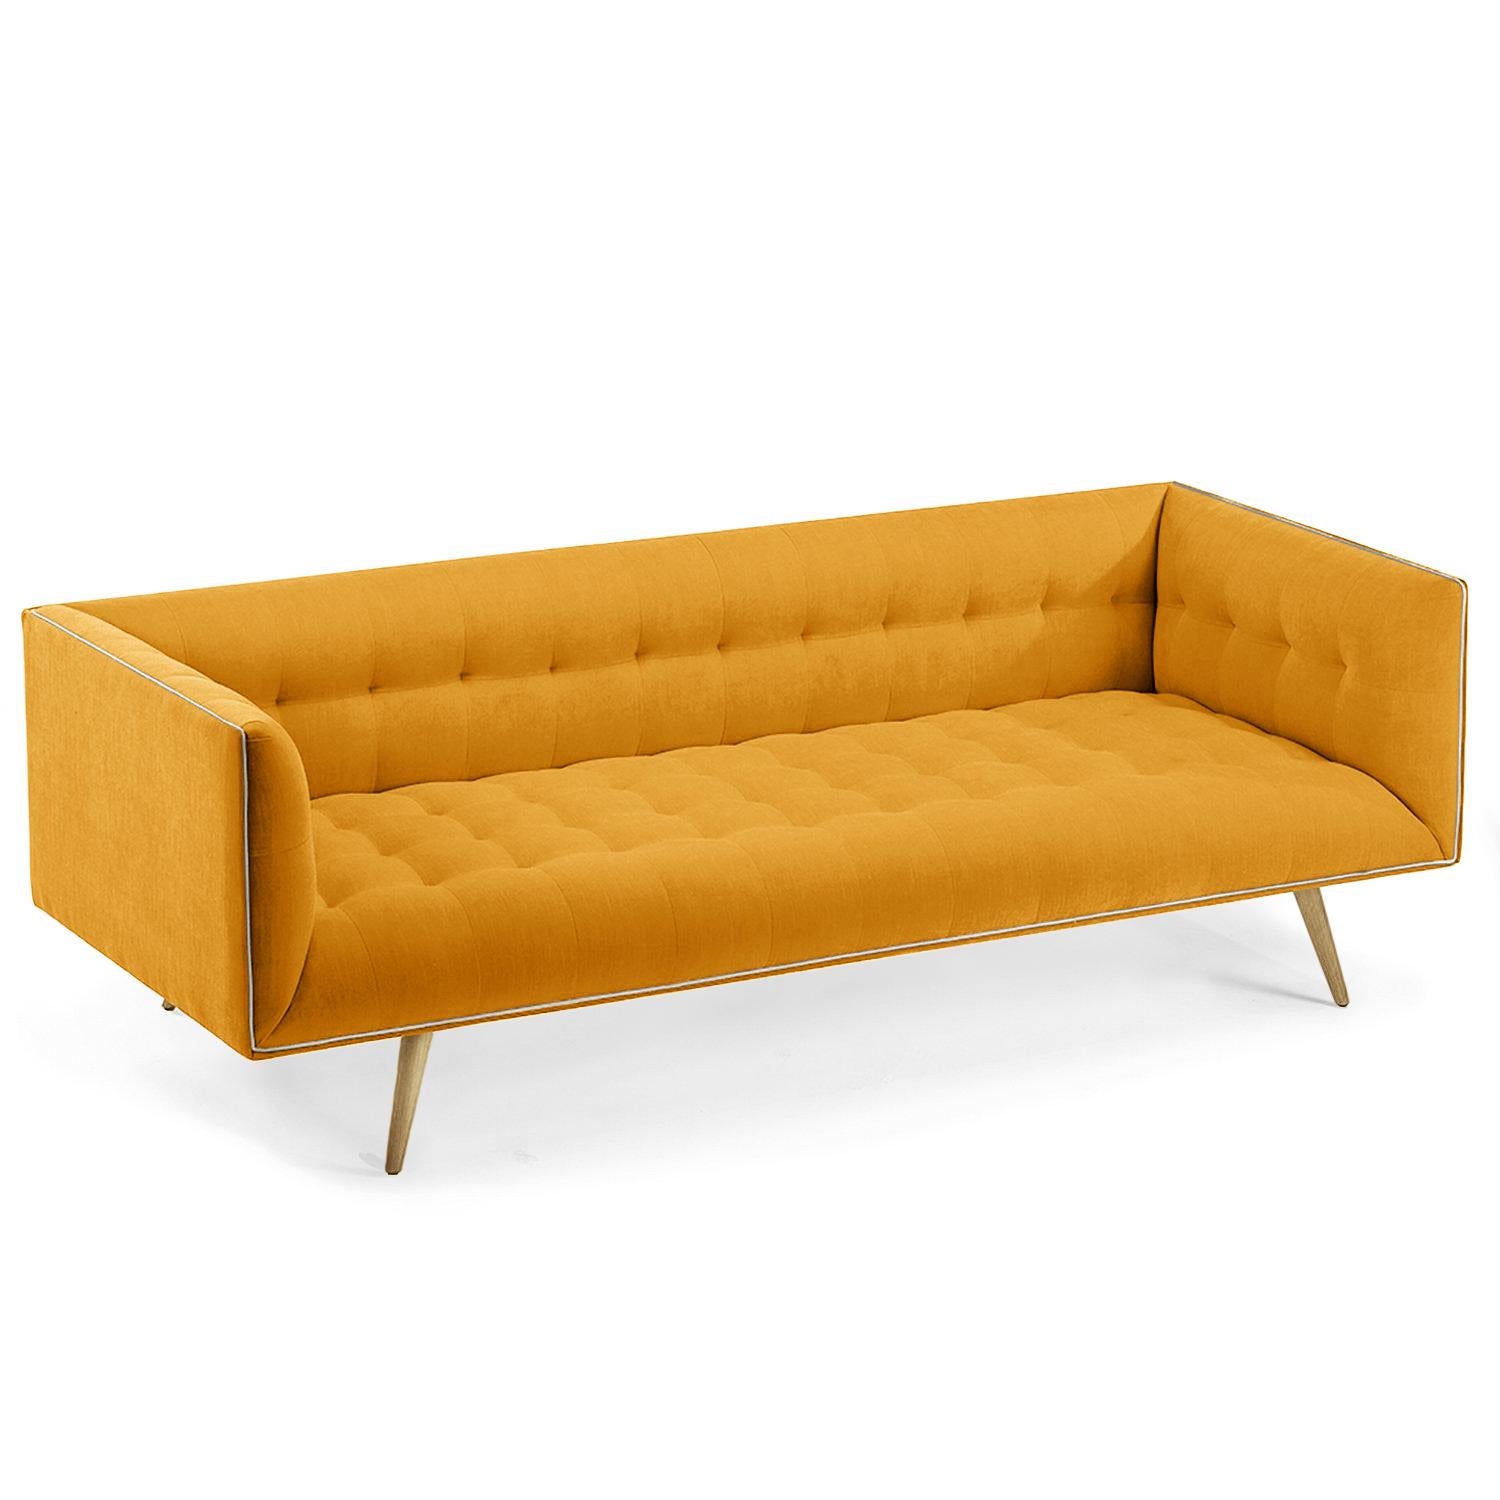 Hand-Crafted Dust Sofa, Medium with Natural Light Oak For Sale